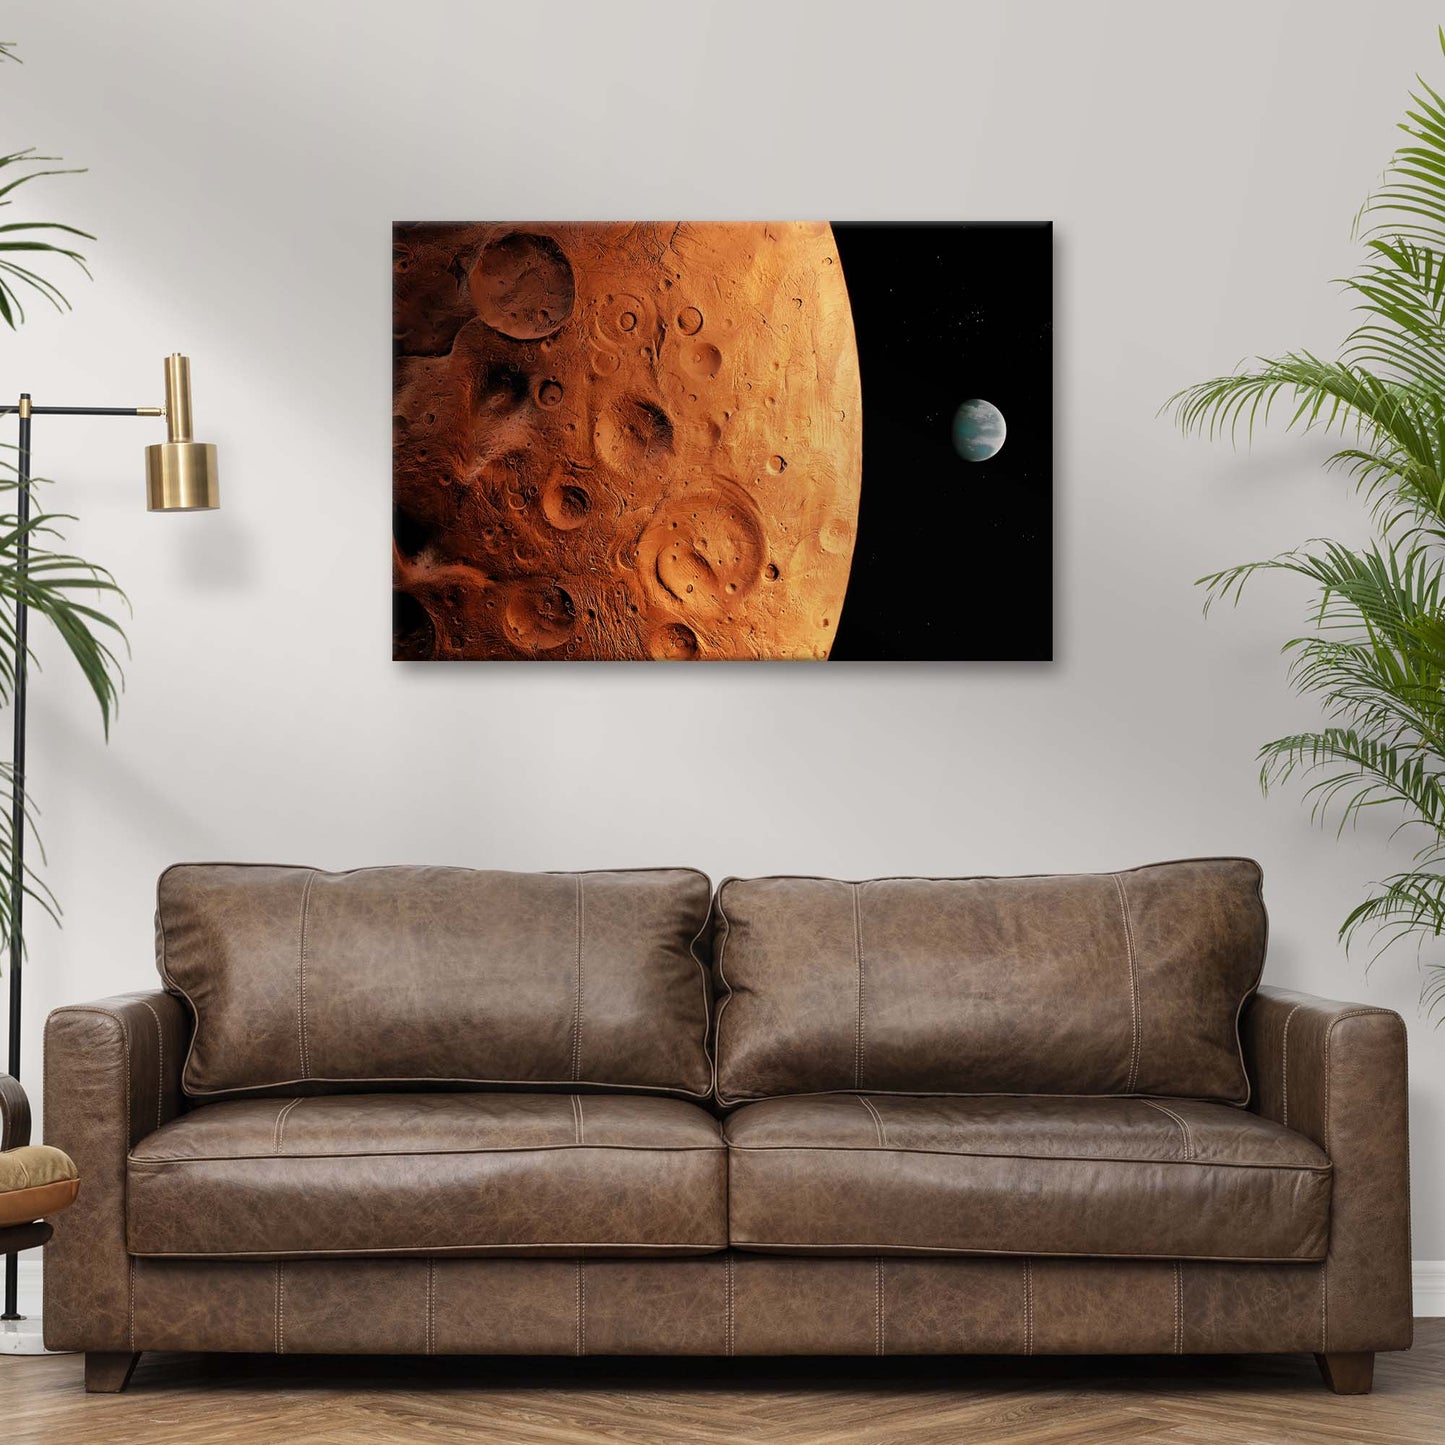 Planet Mars Craters Canvas Wall Art  - Image by Tailored Canvases